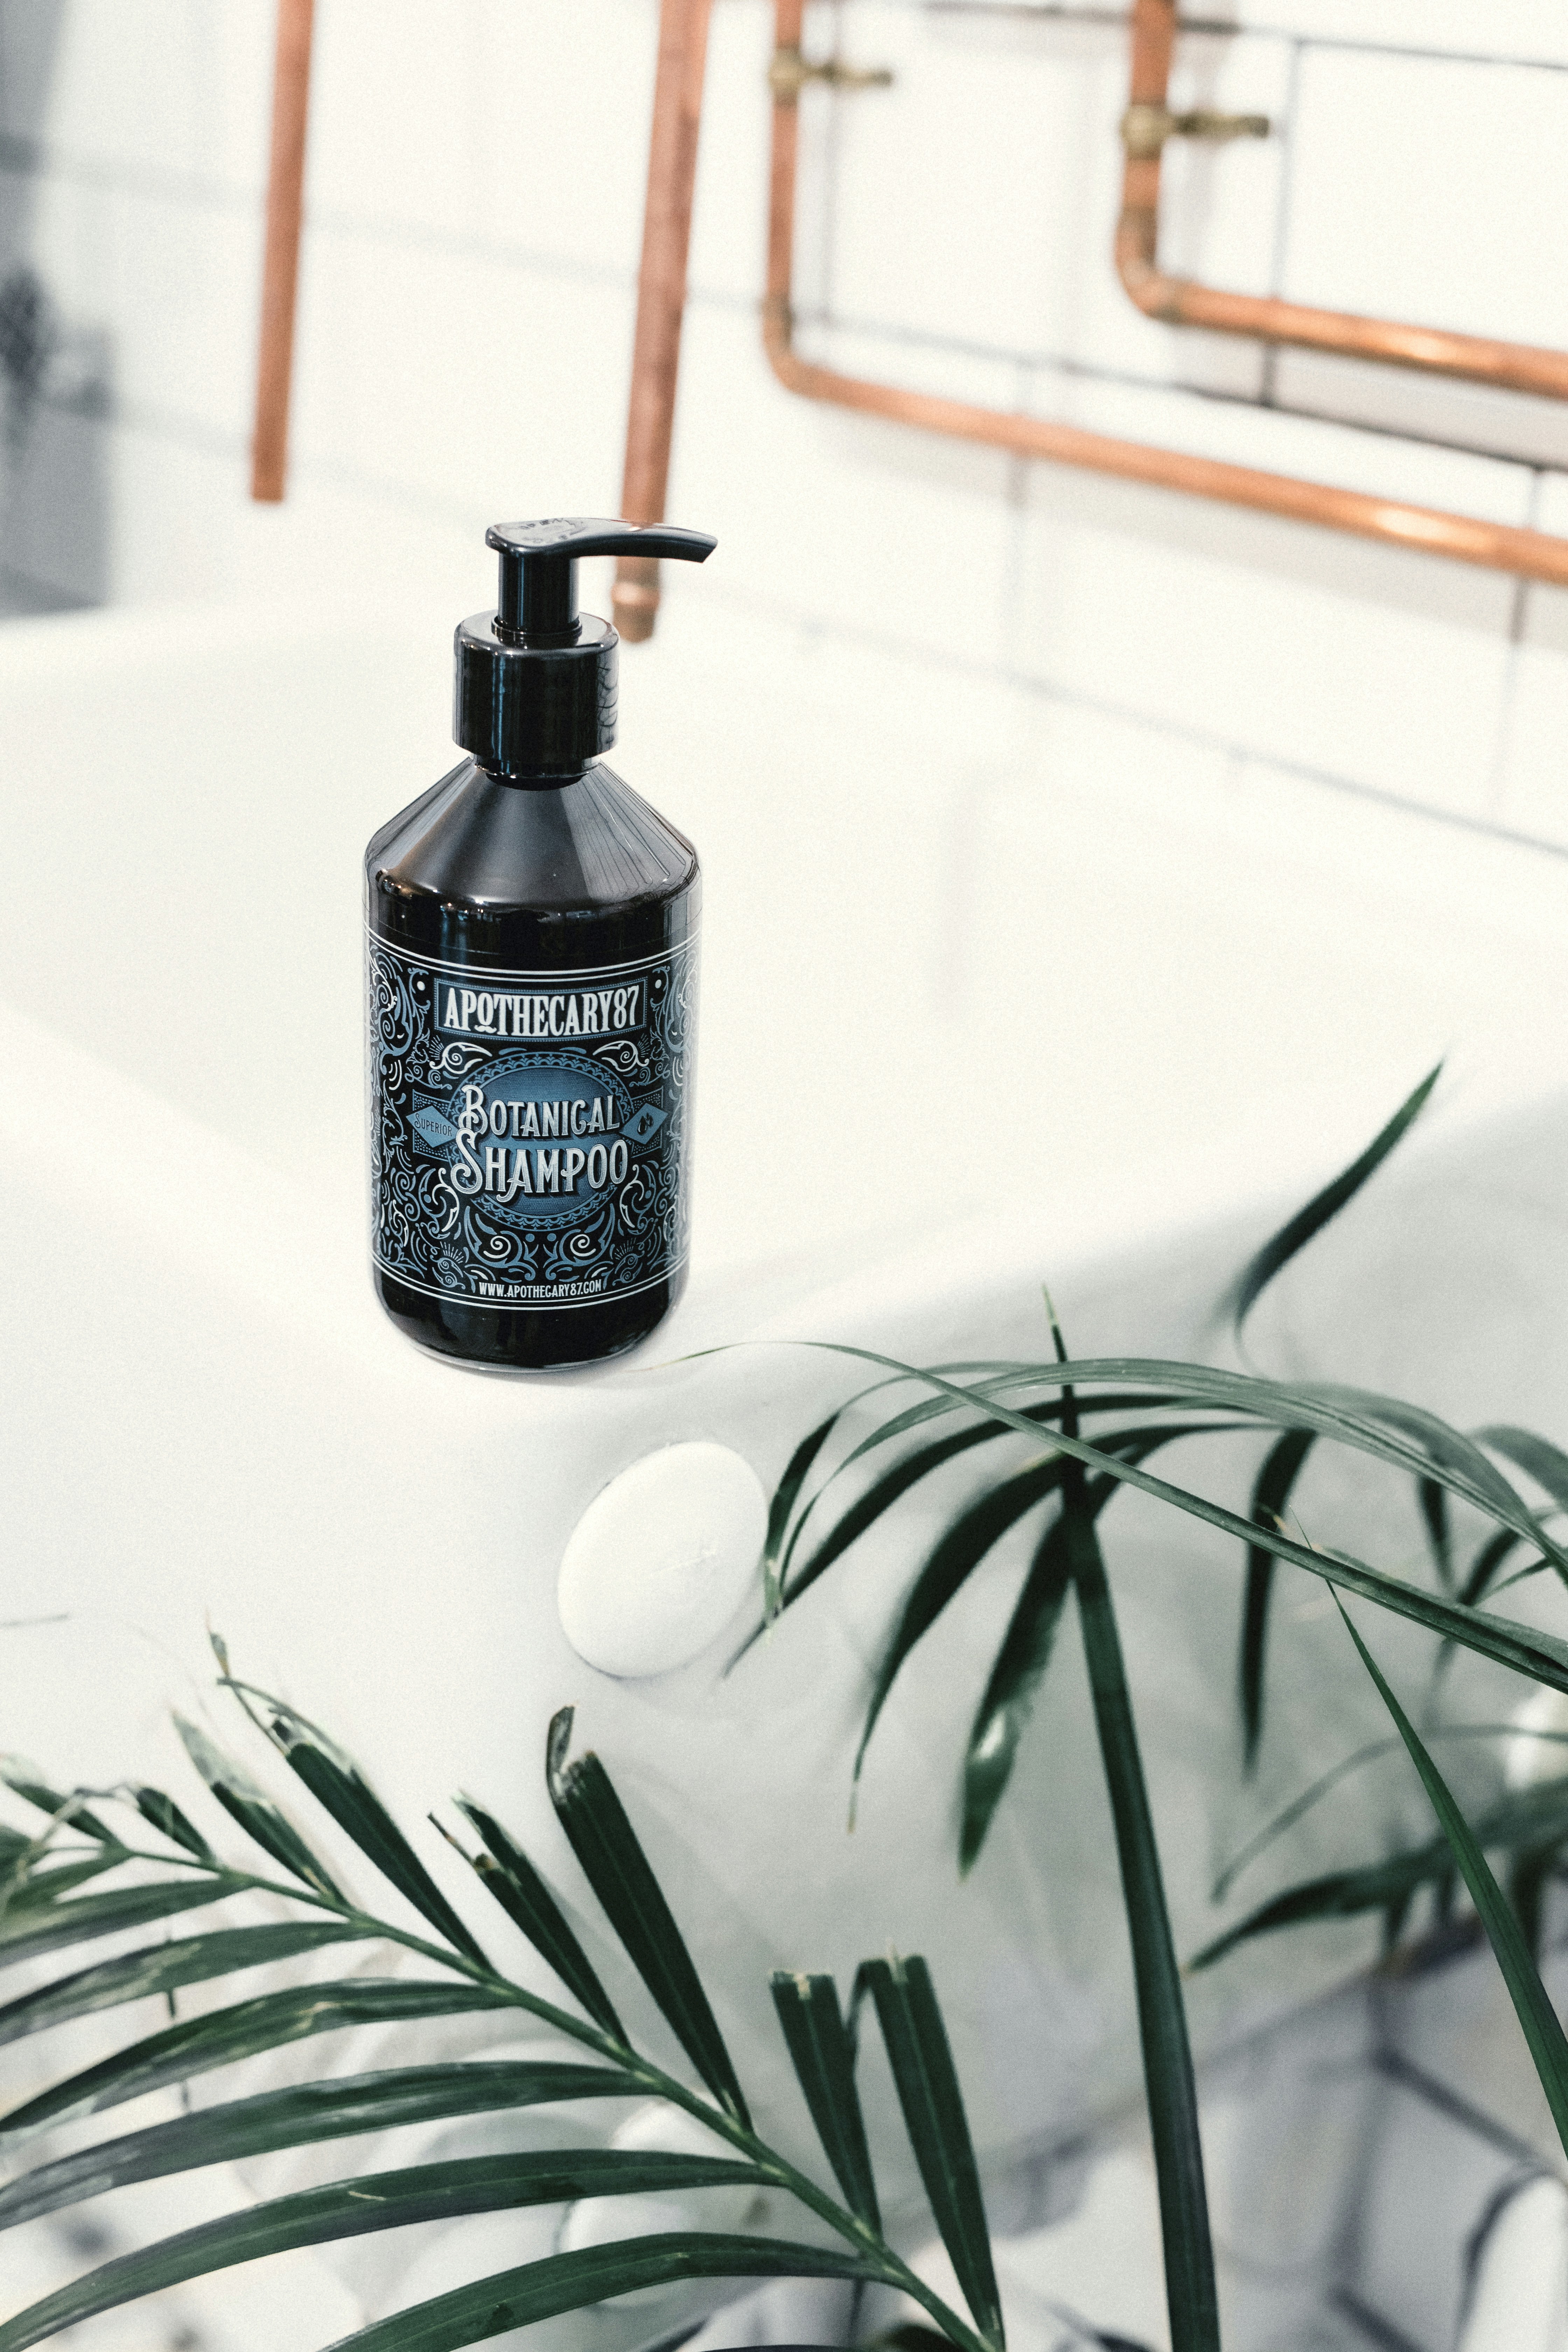 Is The Bumble And Bumble Seaweed Shampoo Good For Oily Hair?